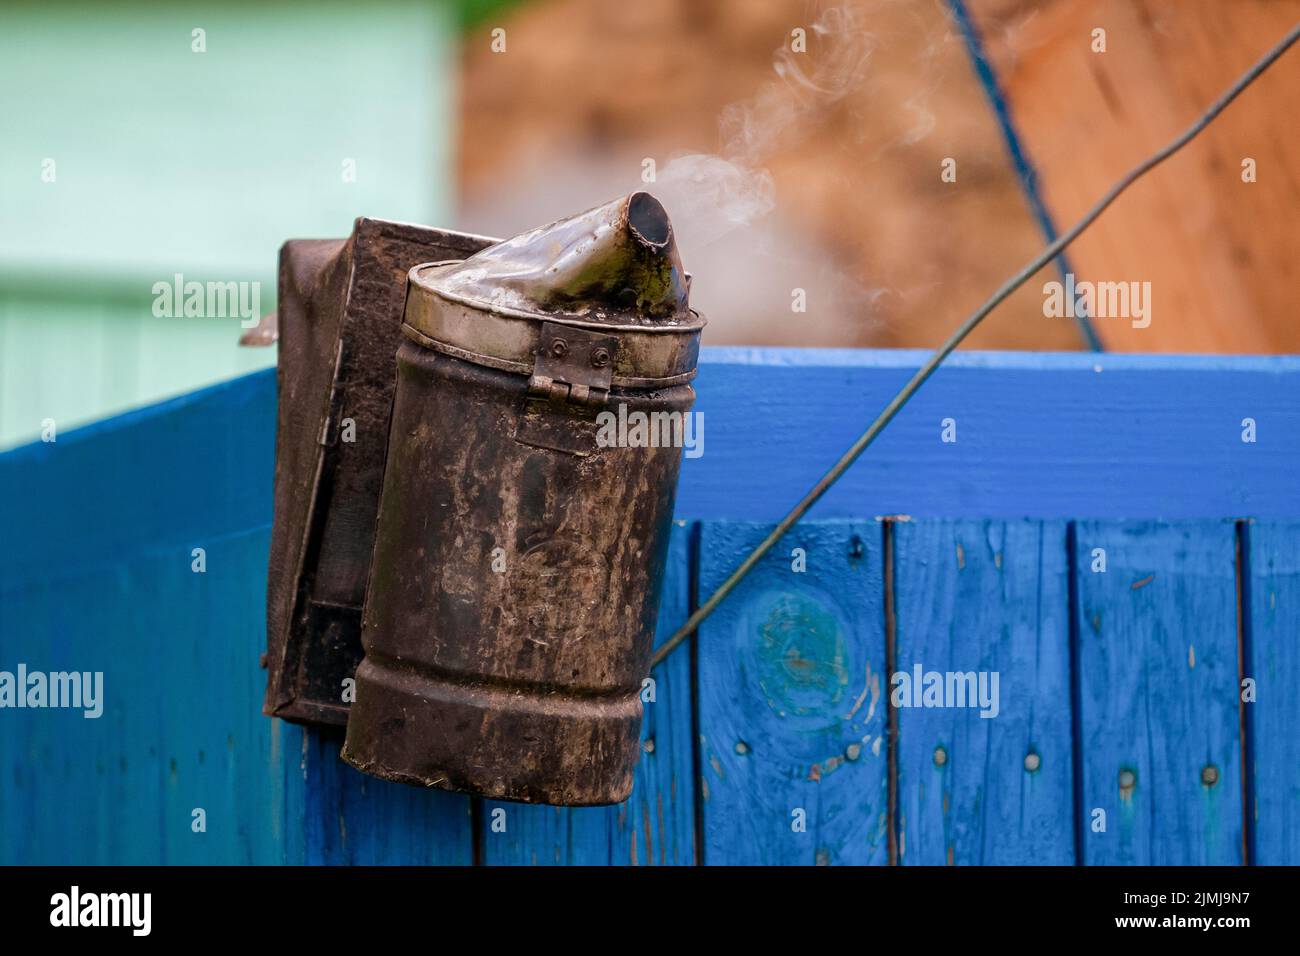 The beekeeper's smoker is working on the wall of the hive. Smoke billows Stock Photo